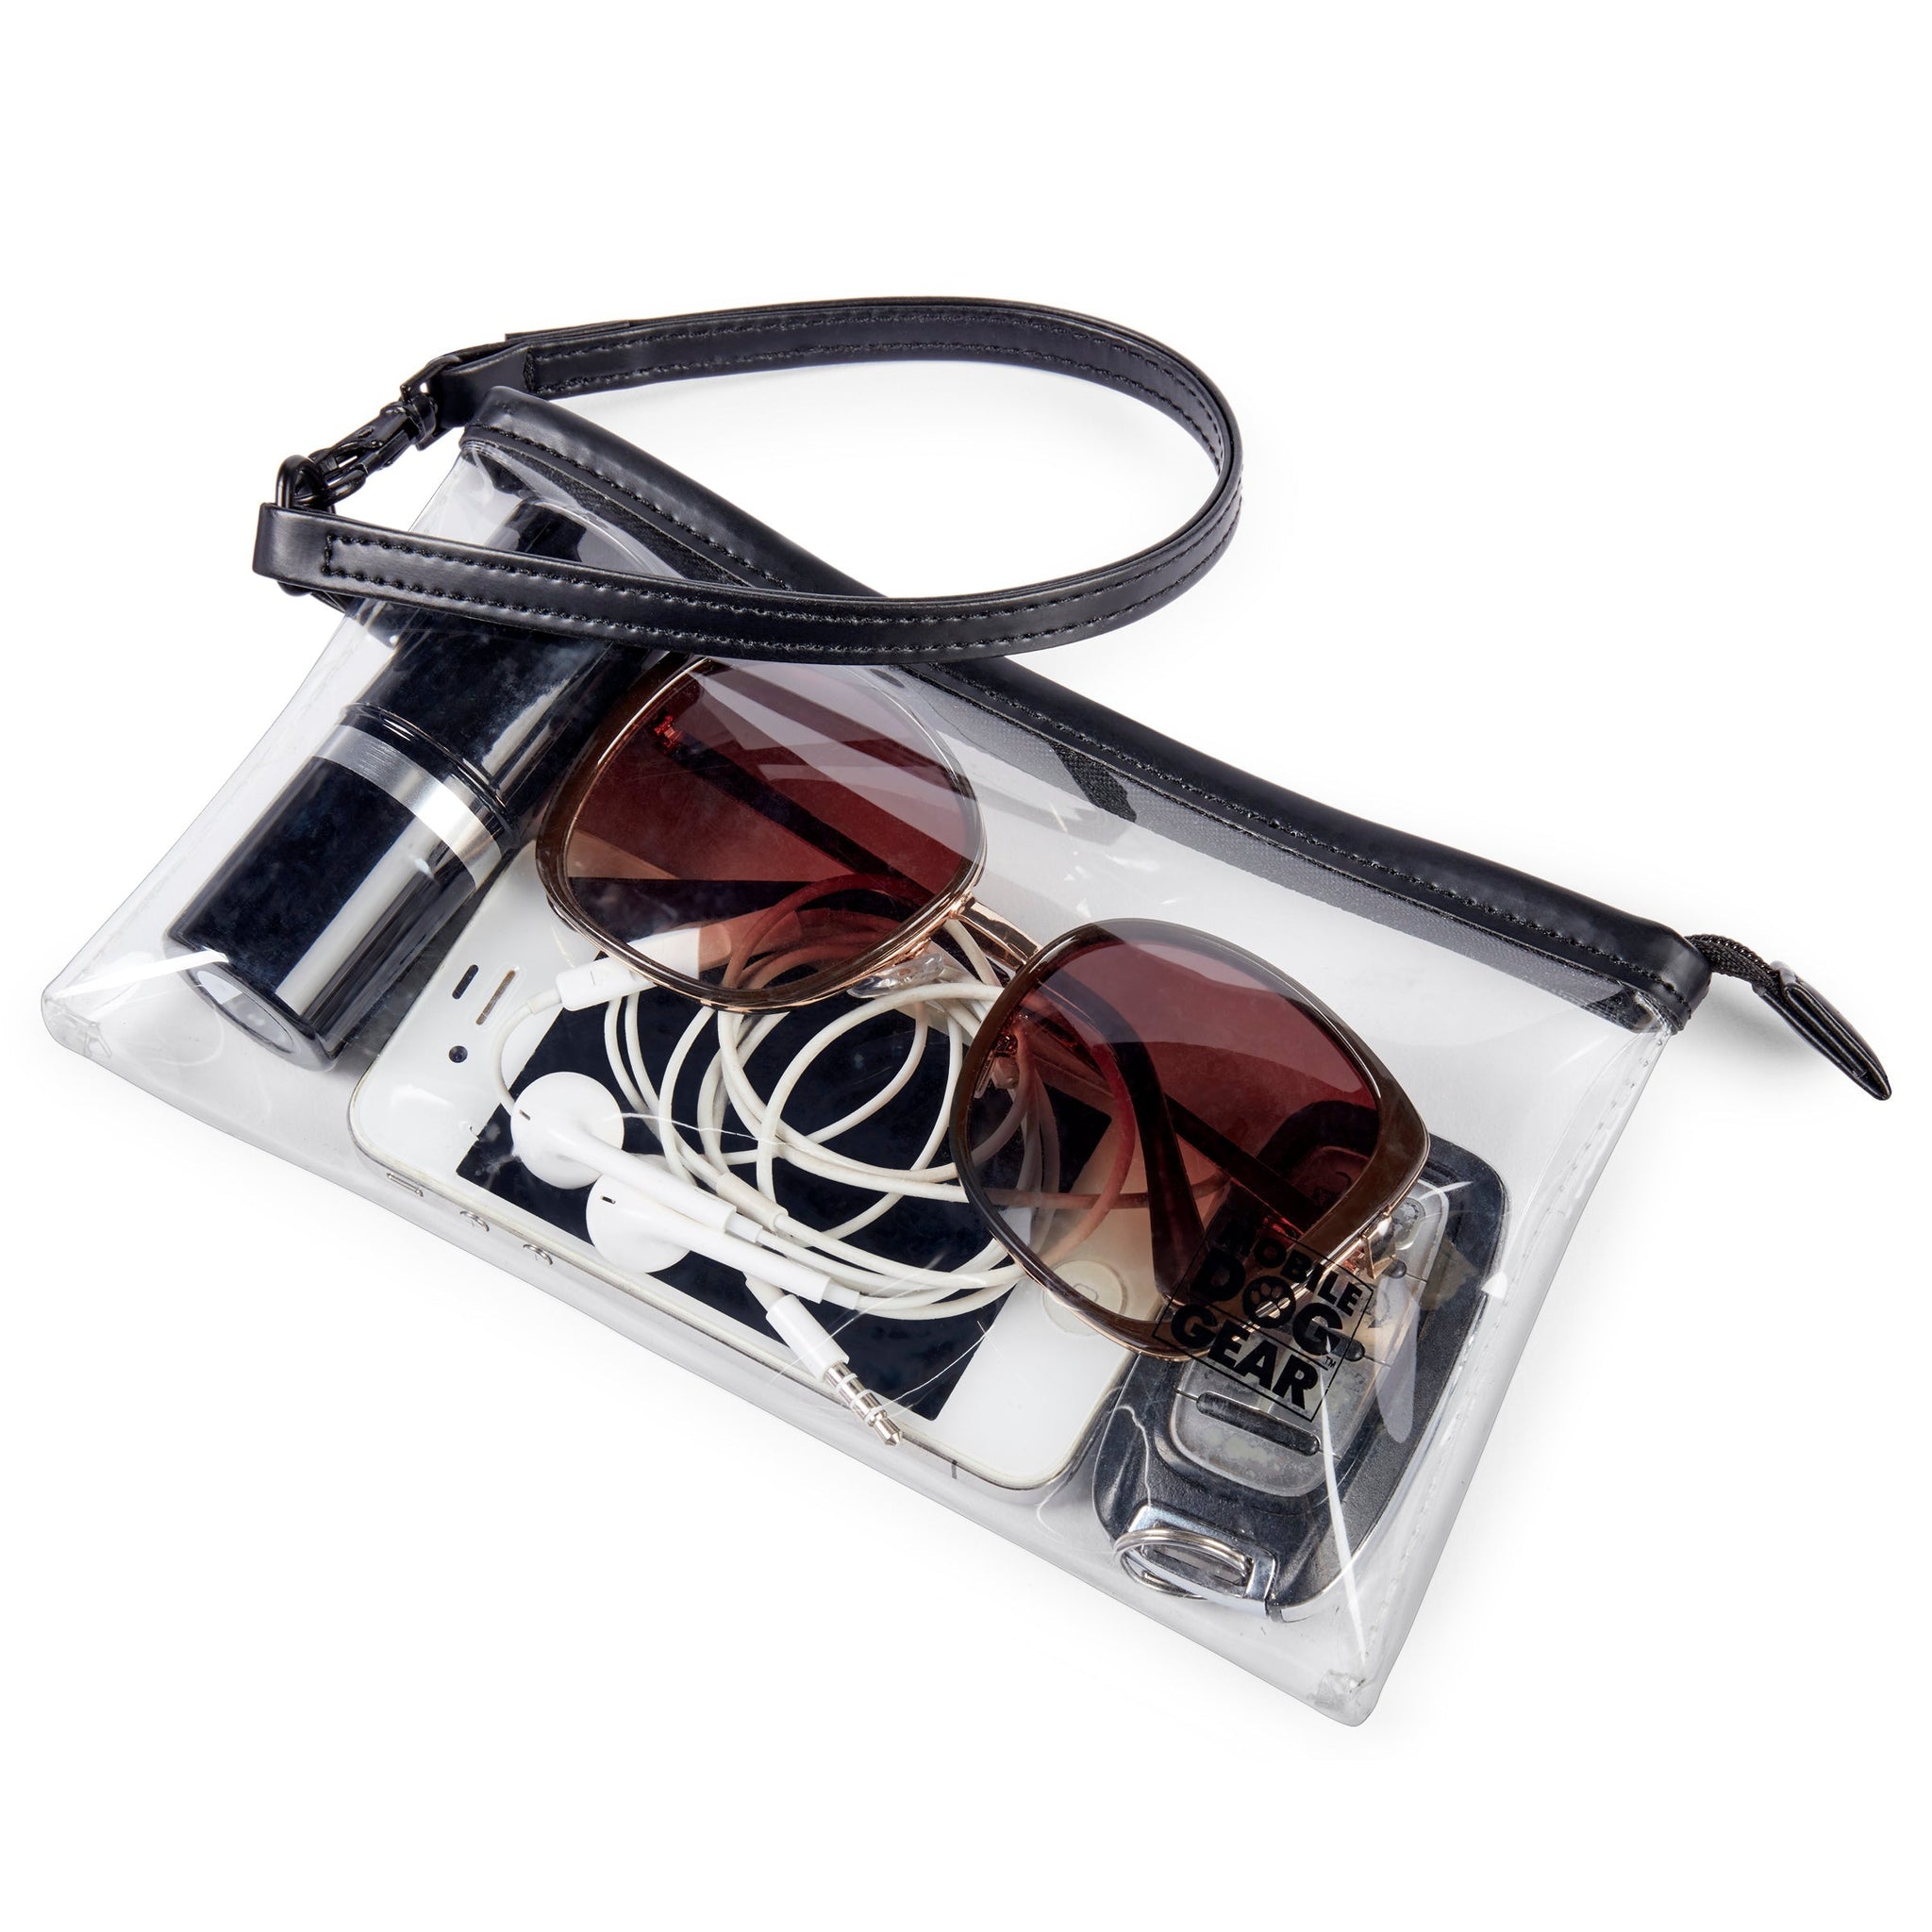  clear wristlet, ideal for storing sunglasses, phone, chargers or any other travel essentials.